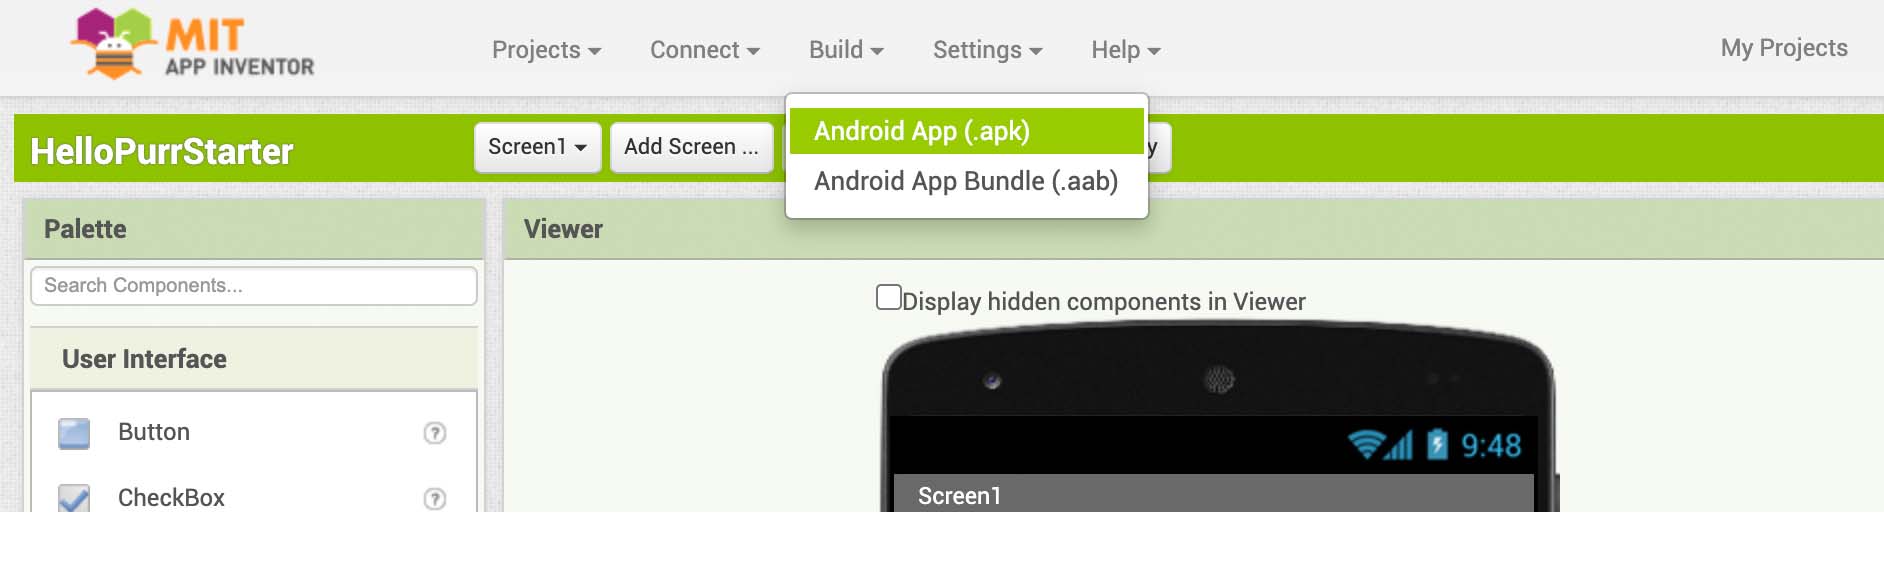 The Build feature lets you create fully packaged apps (.apk files).